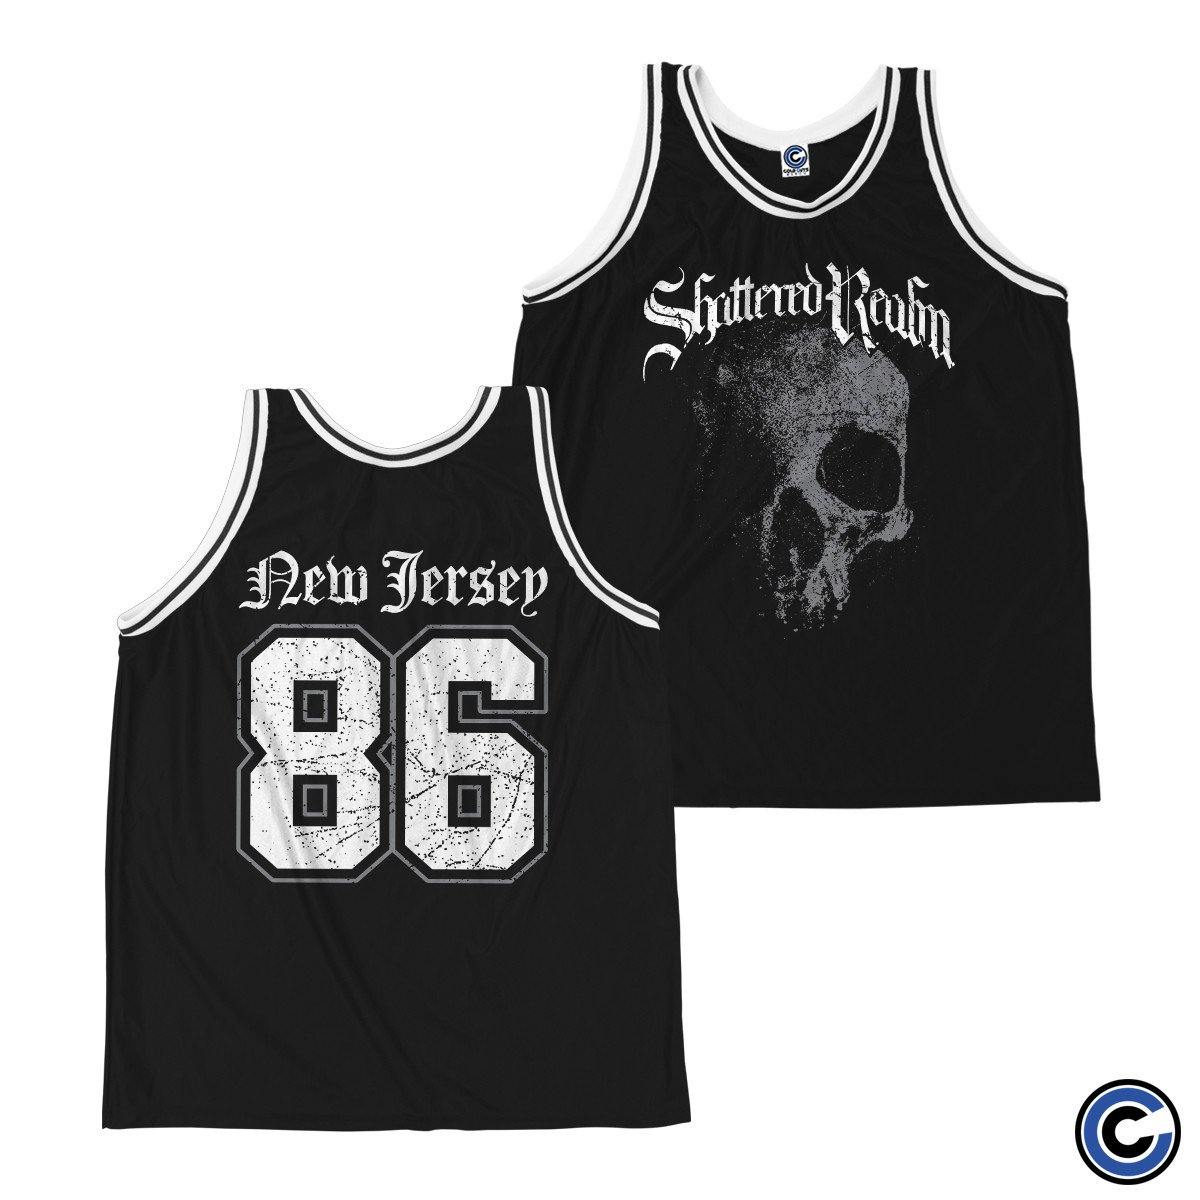 Buy – Shattered Realm "Broken Ties" Basketball Jersey – Band & Music Merch – Cold Cuts Merch